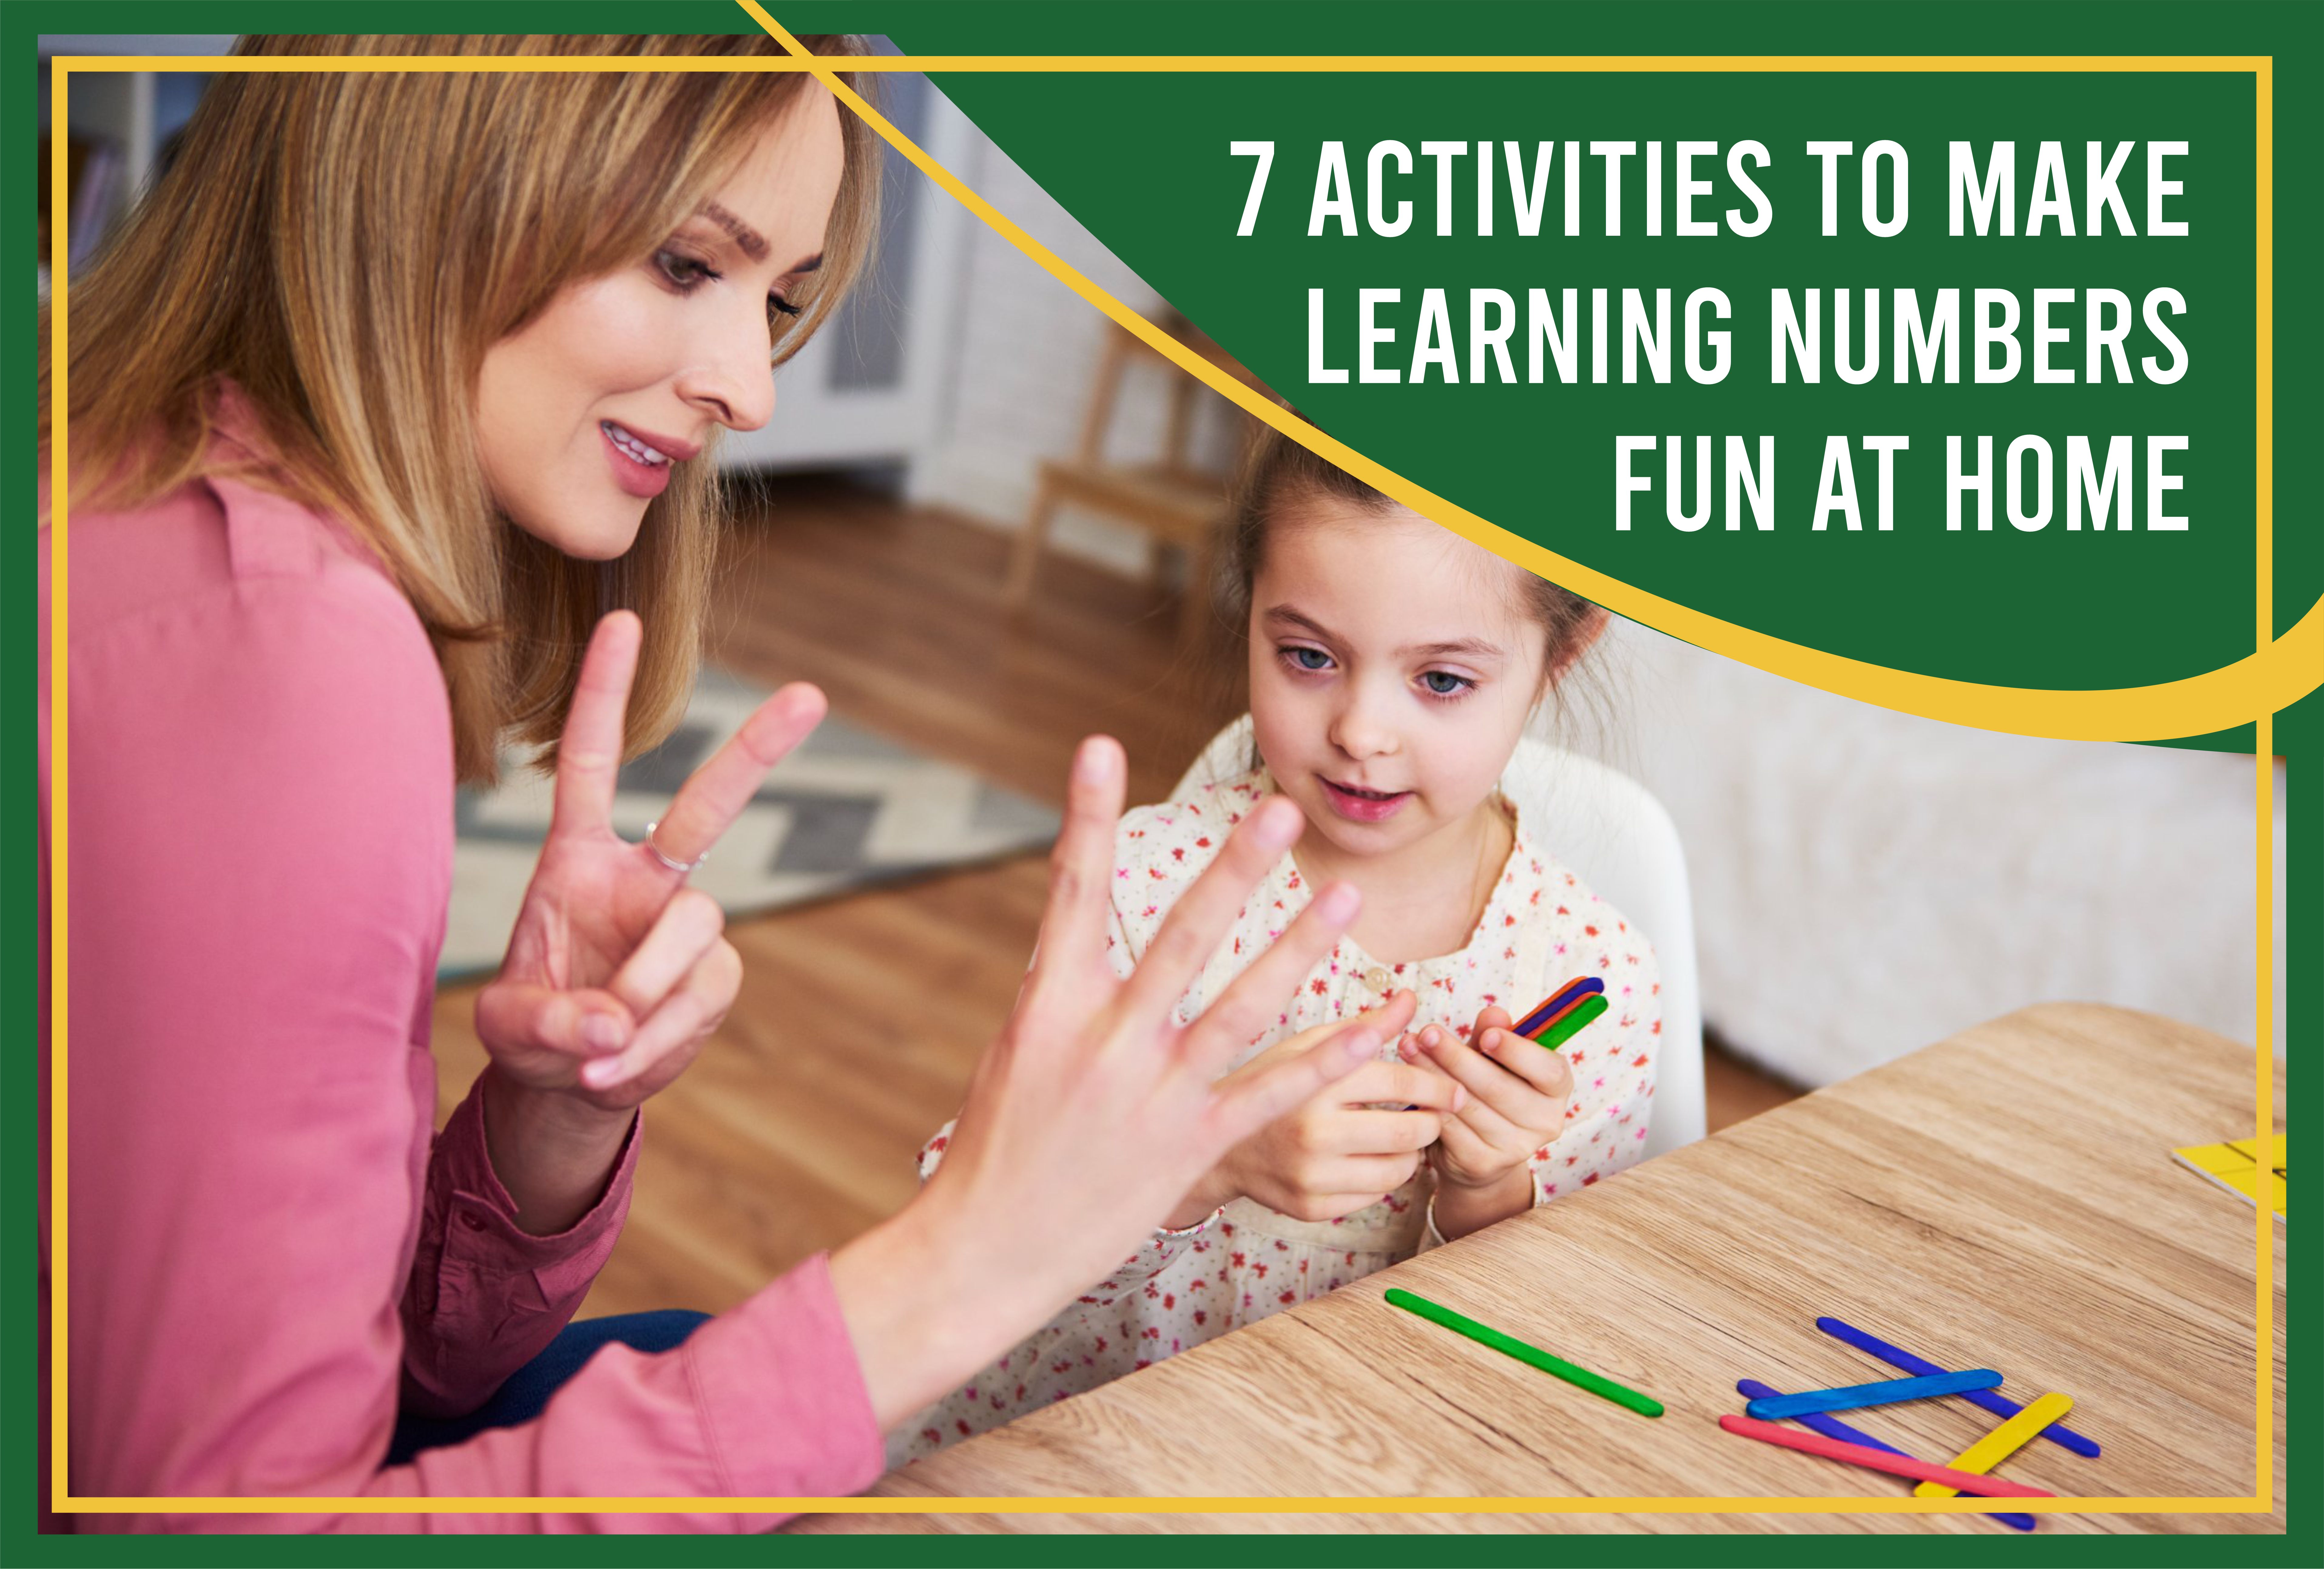 Activities to Make Learning Numbers Fun at Home